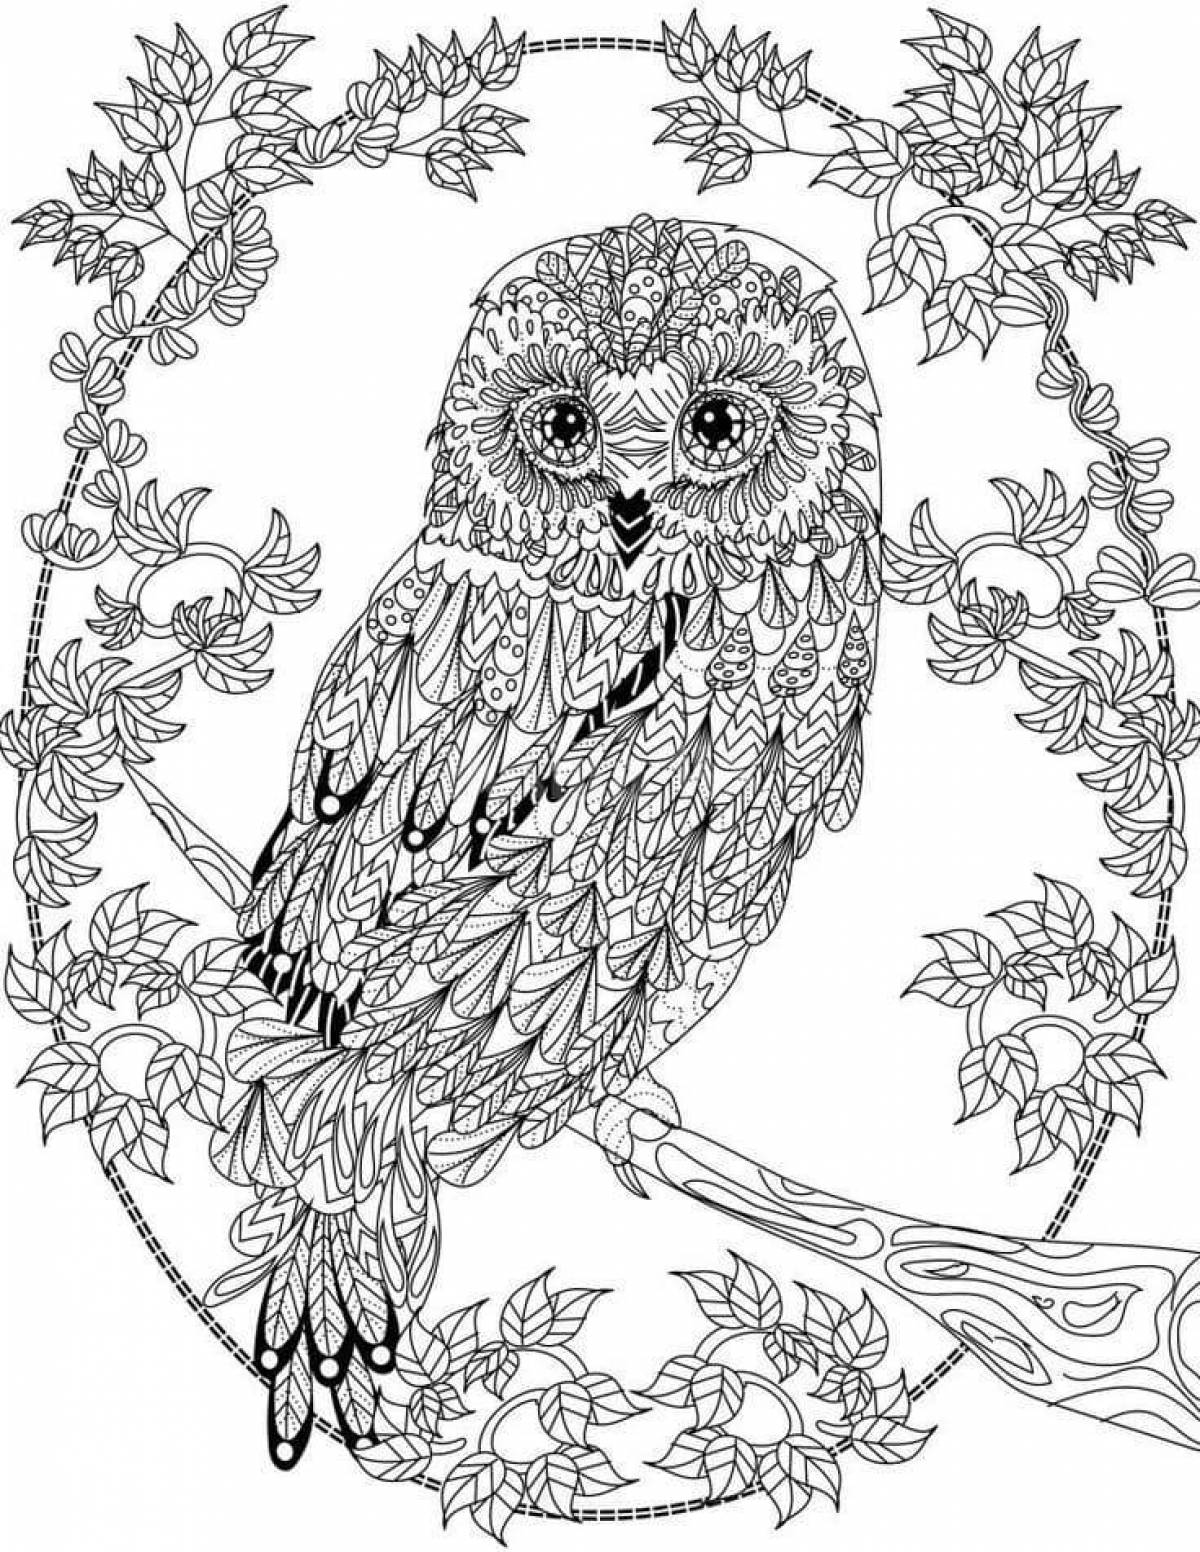 Large and complex coloring book